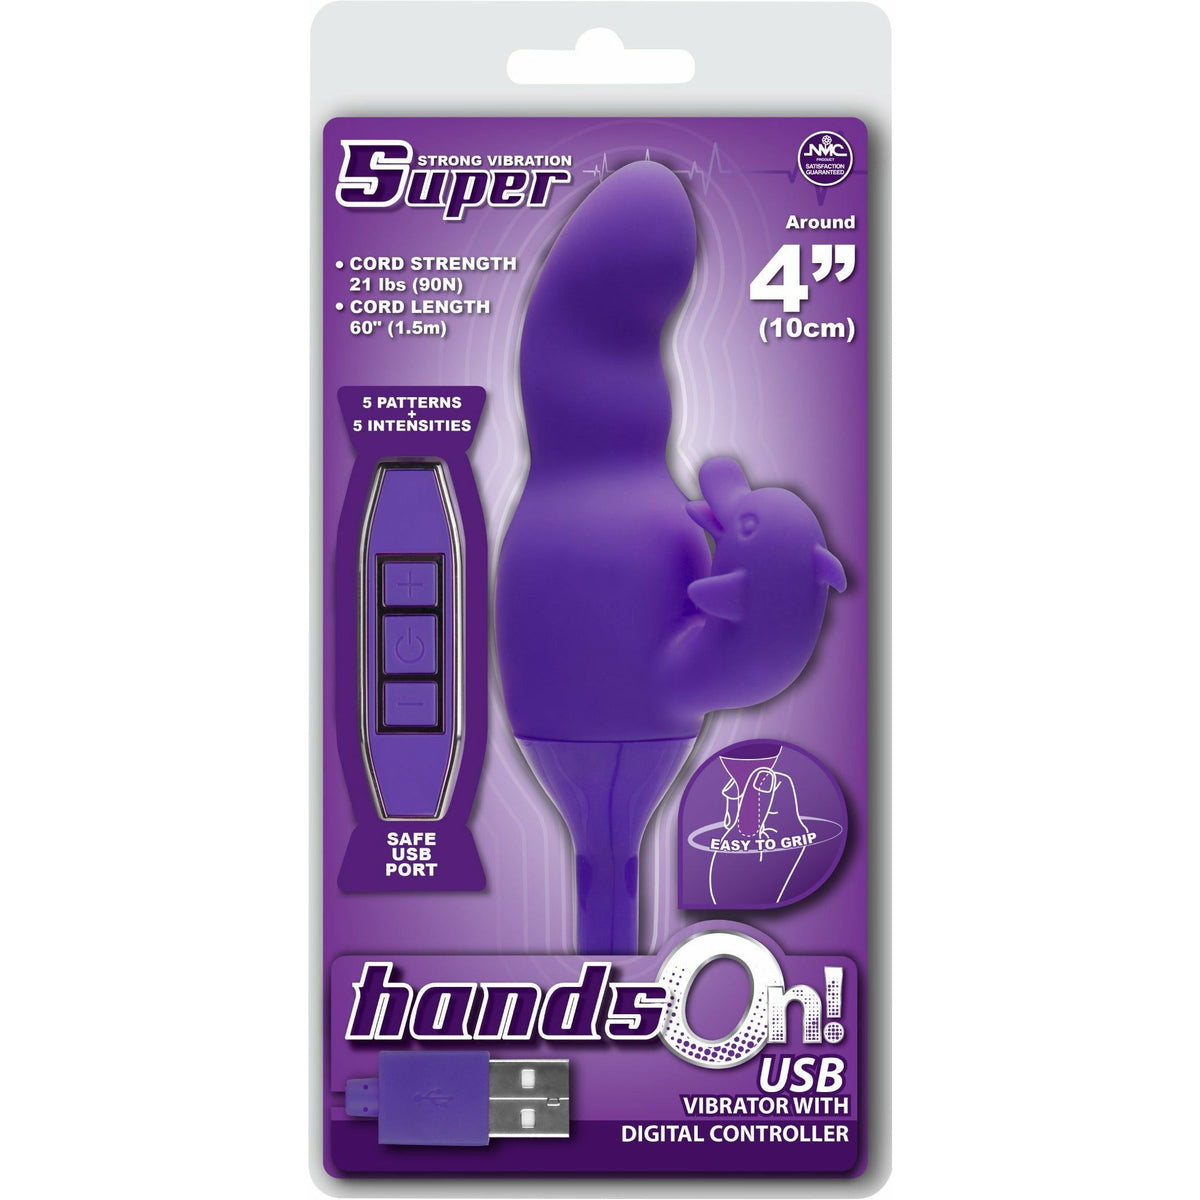 NMC Hands On - Dolphin Dual Vibrator - Rechargeable - Purple